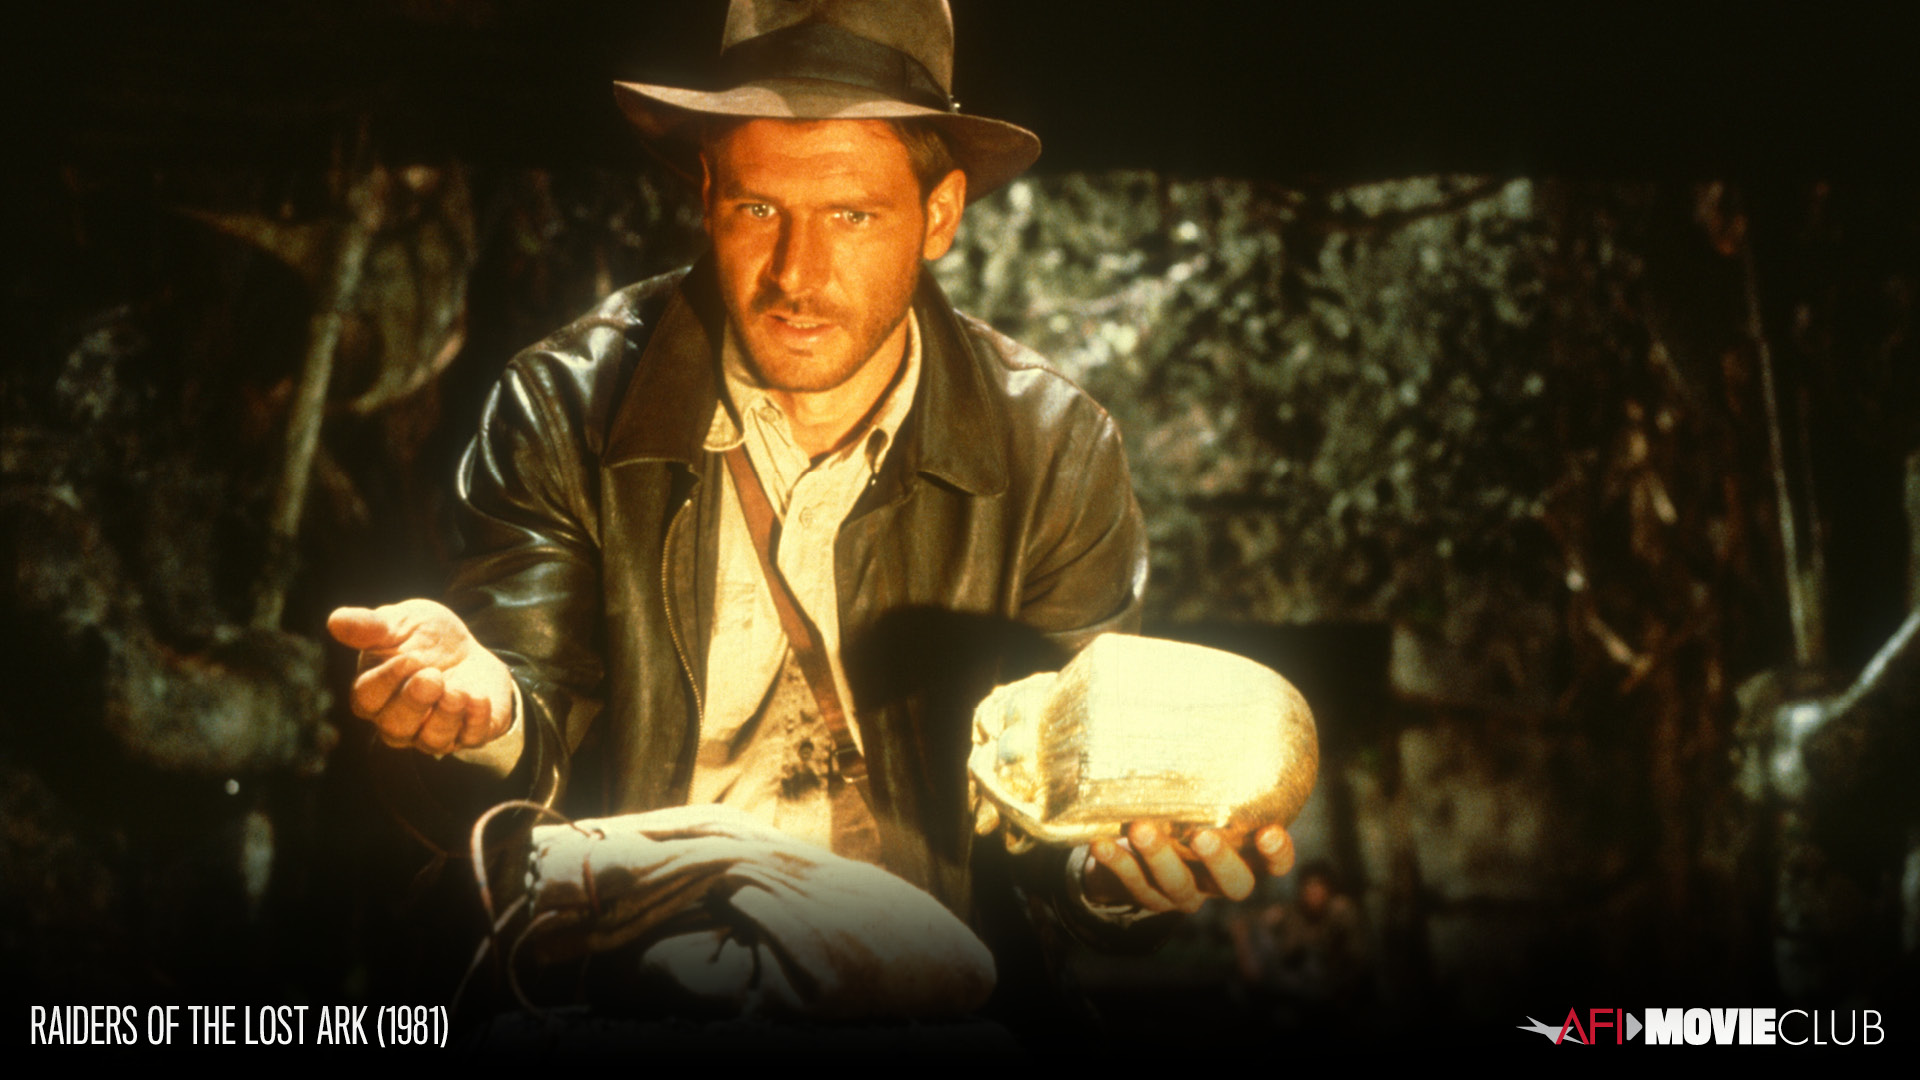 Indiana Jones and the Raiders of the Lost Ark Film Still - Harrison Ford